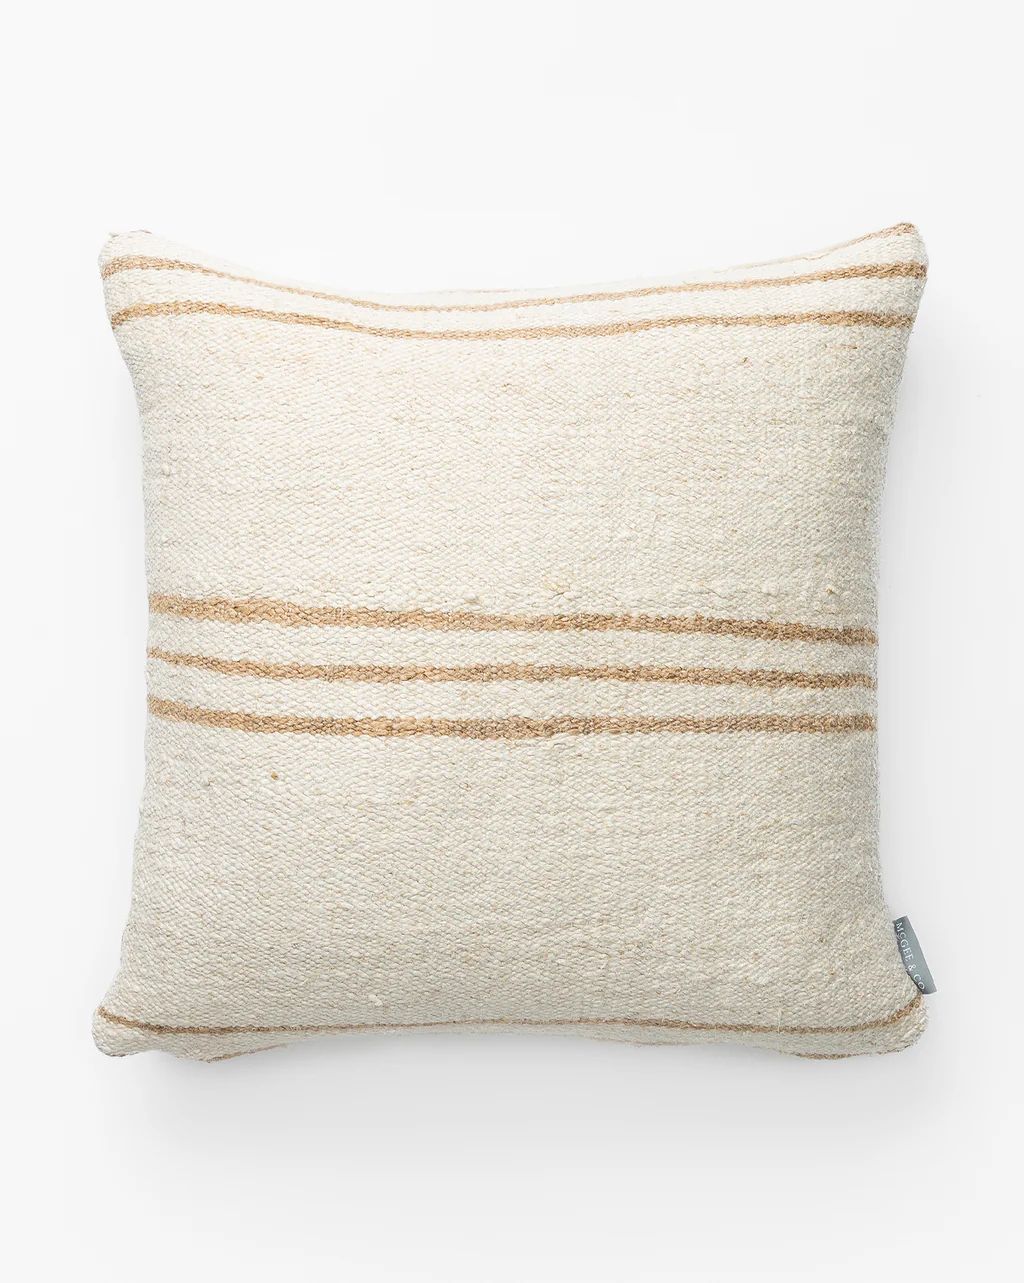 Natural Striped Vintage Pillow Cover No. 5 | McGee & Co.